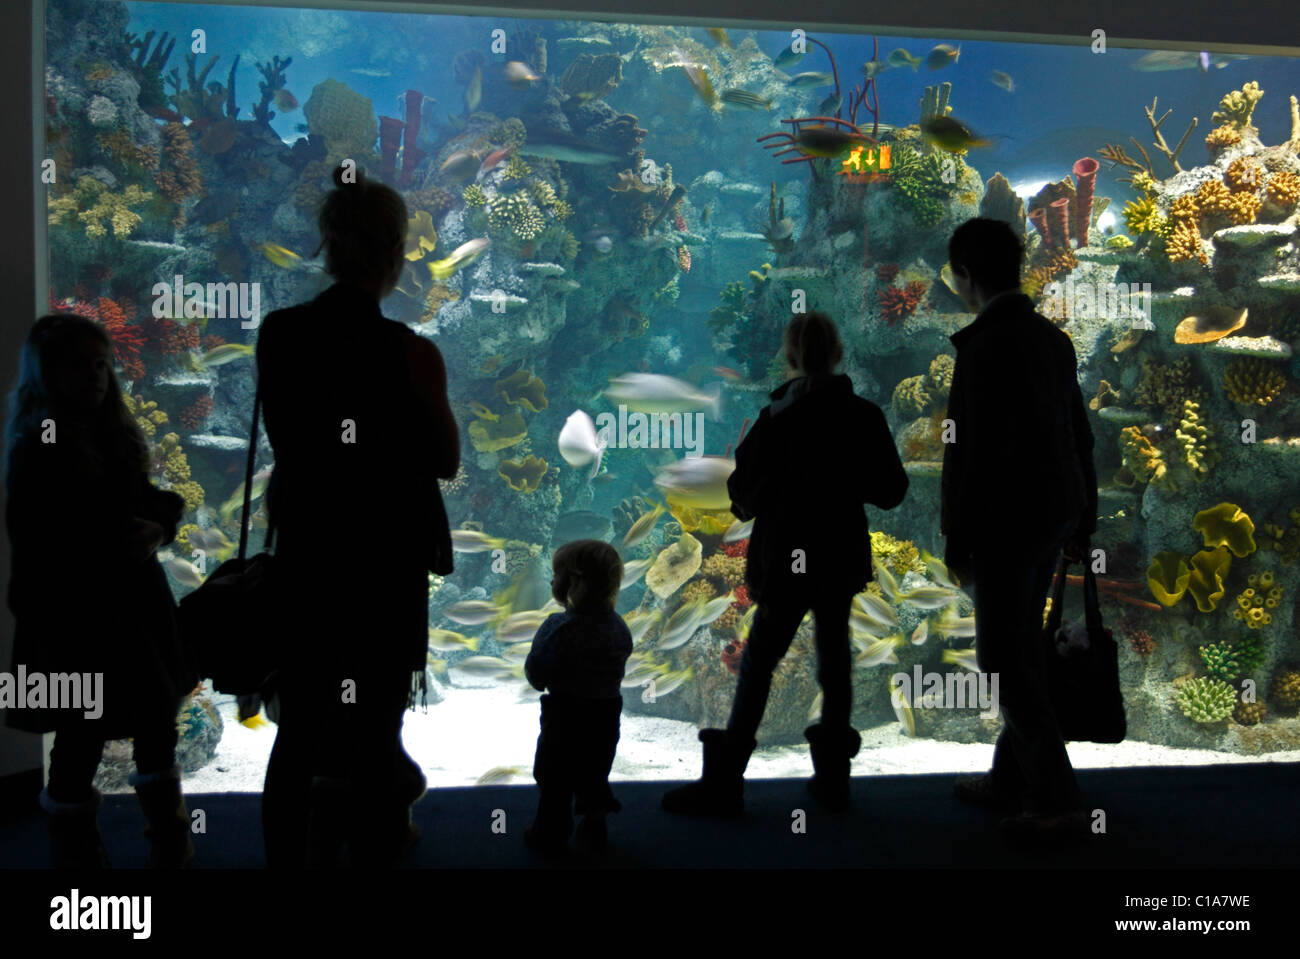 Aquarium tank with people silhouetted against it Stock Photo